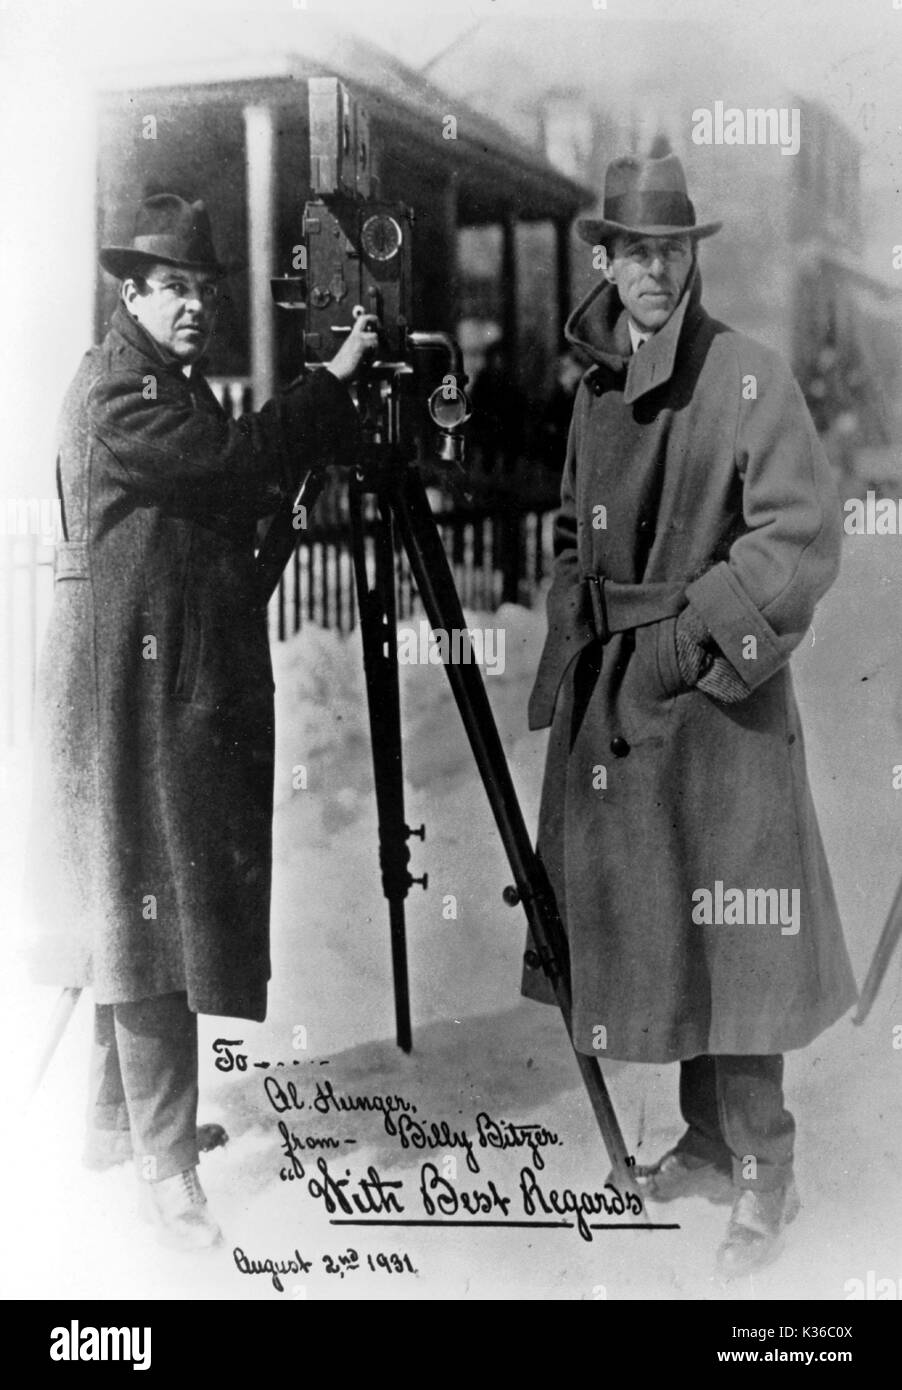 BILLY BITZER, CINEMATOGRAPHER AND D W GRIFFITHS, DIRECTOR Stock Photo